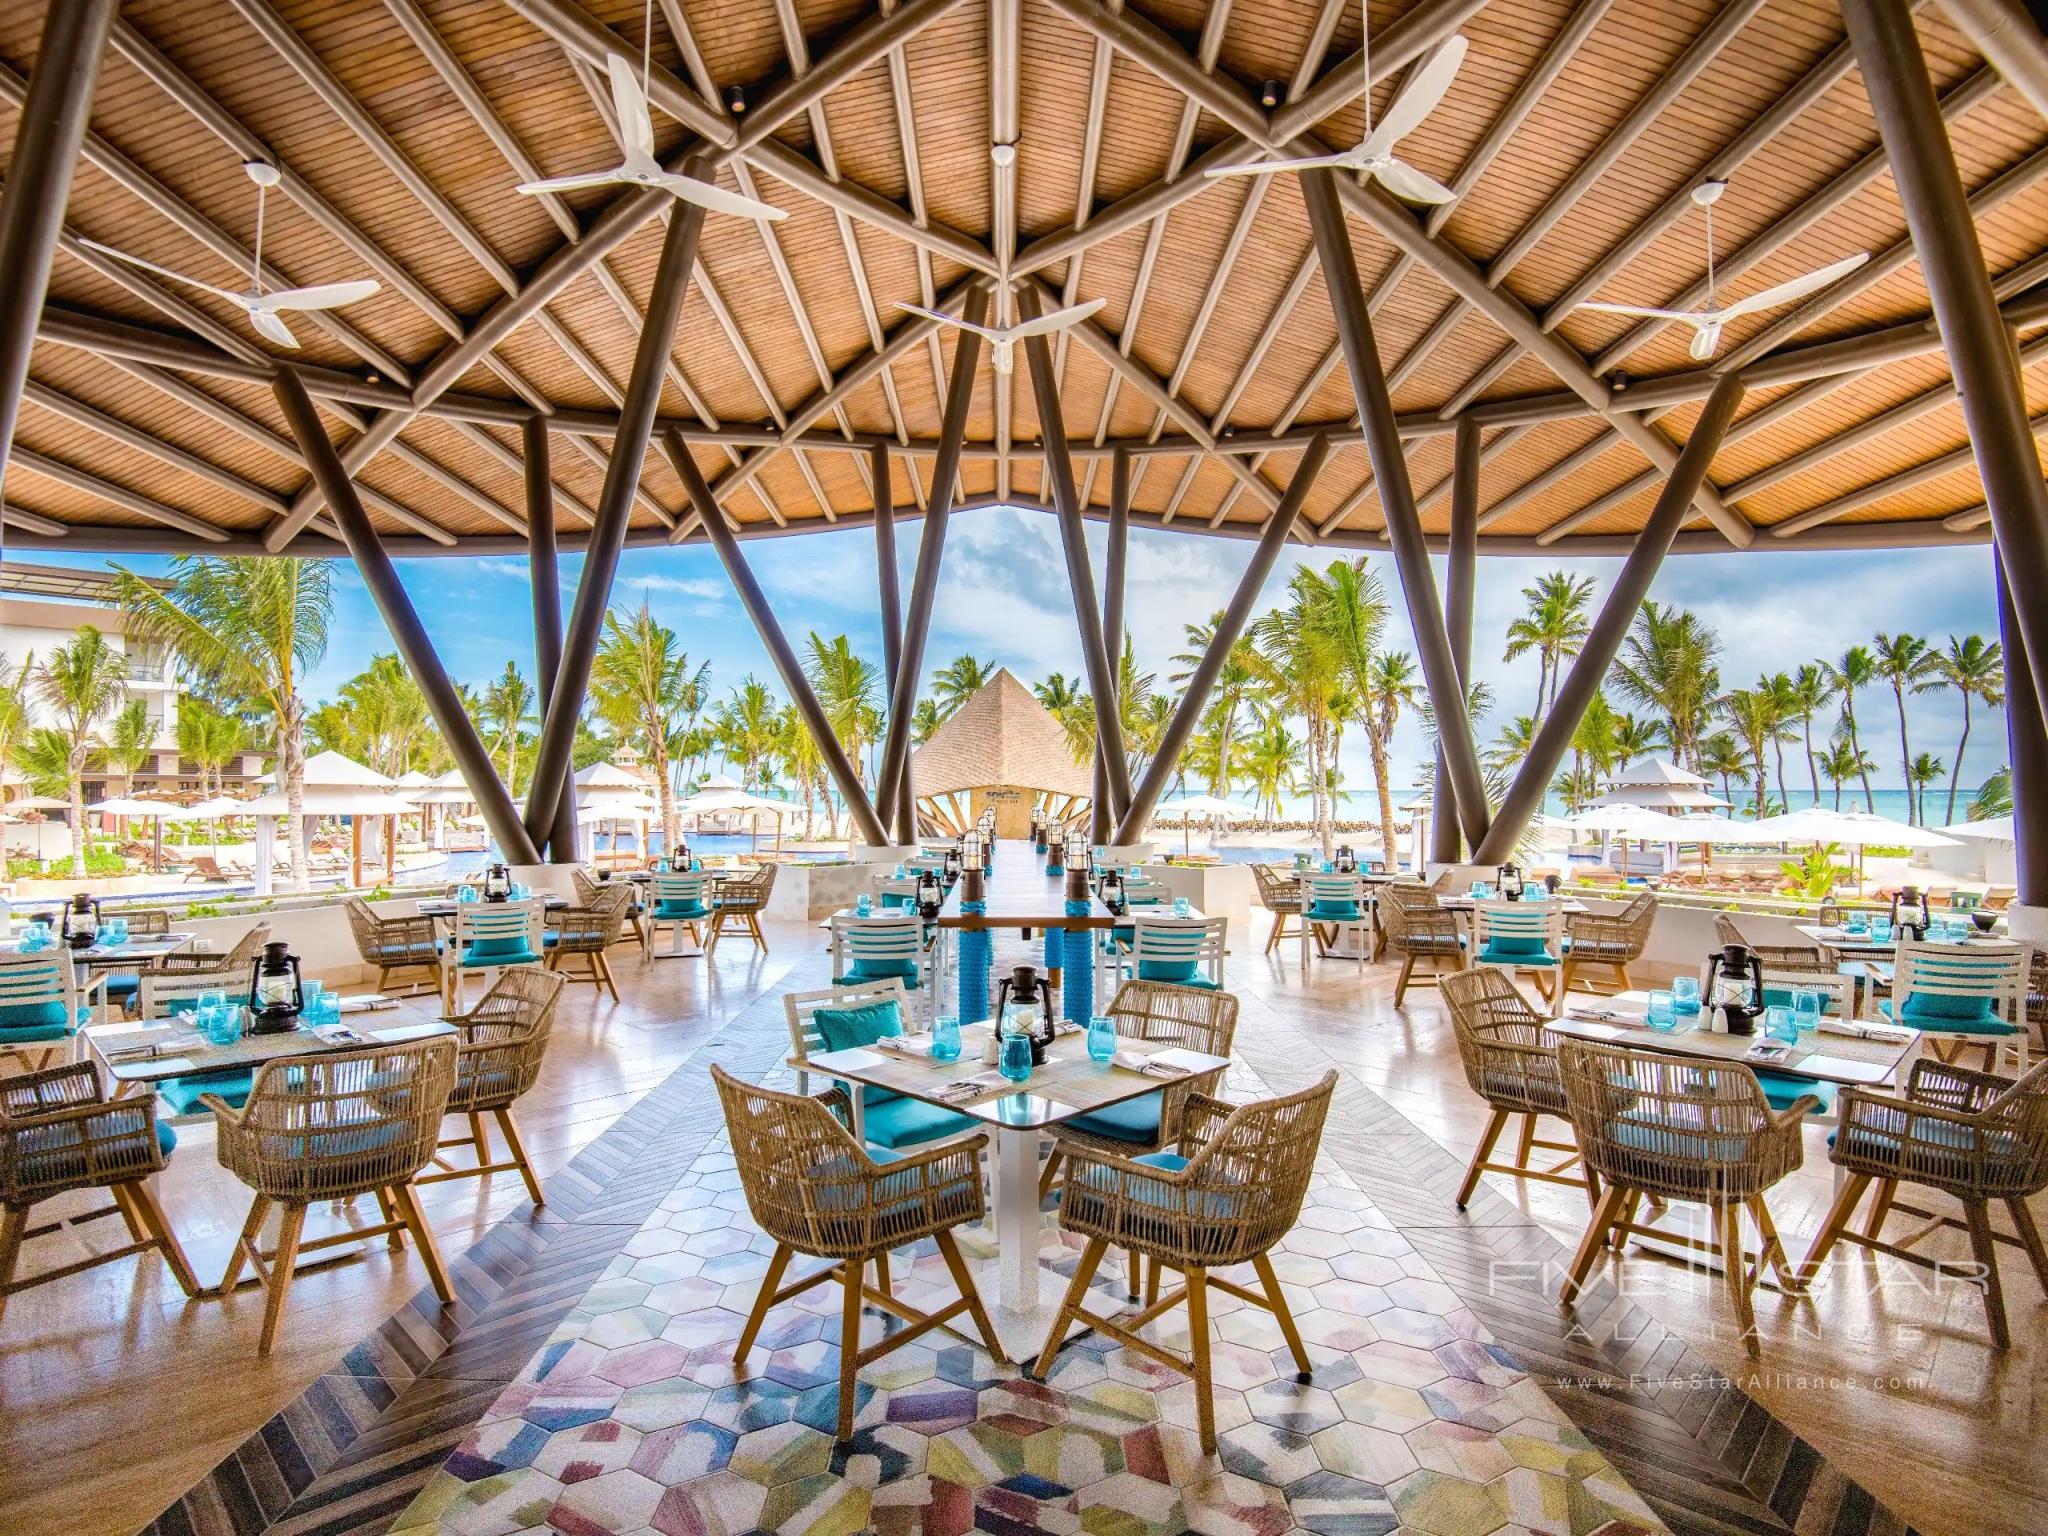 Hyatt Zilara guests have full access to dining options, bars and lounges at Hyatt Ziva Cap Cana